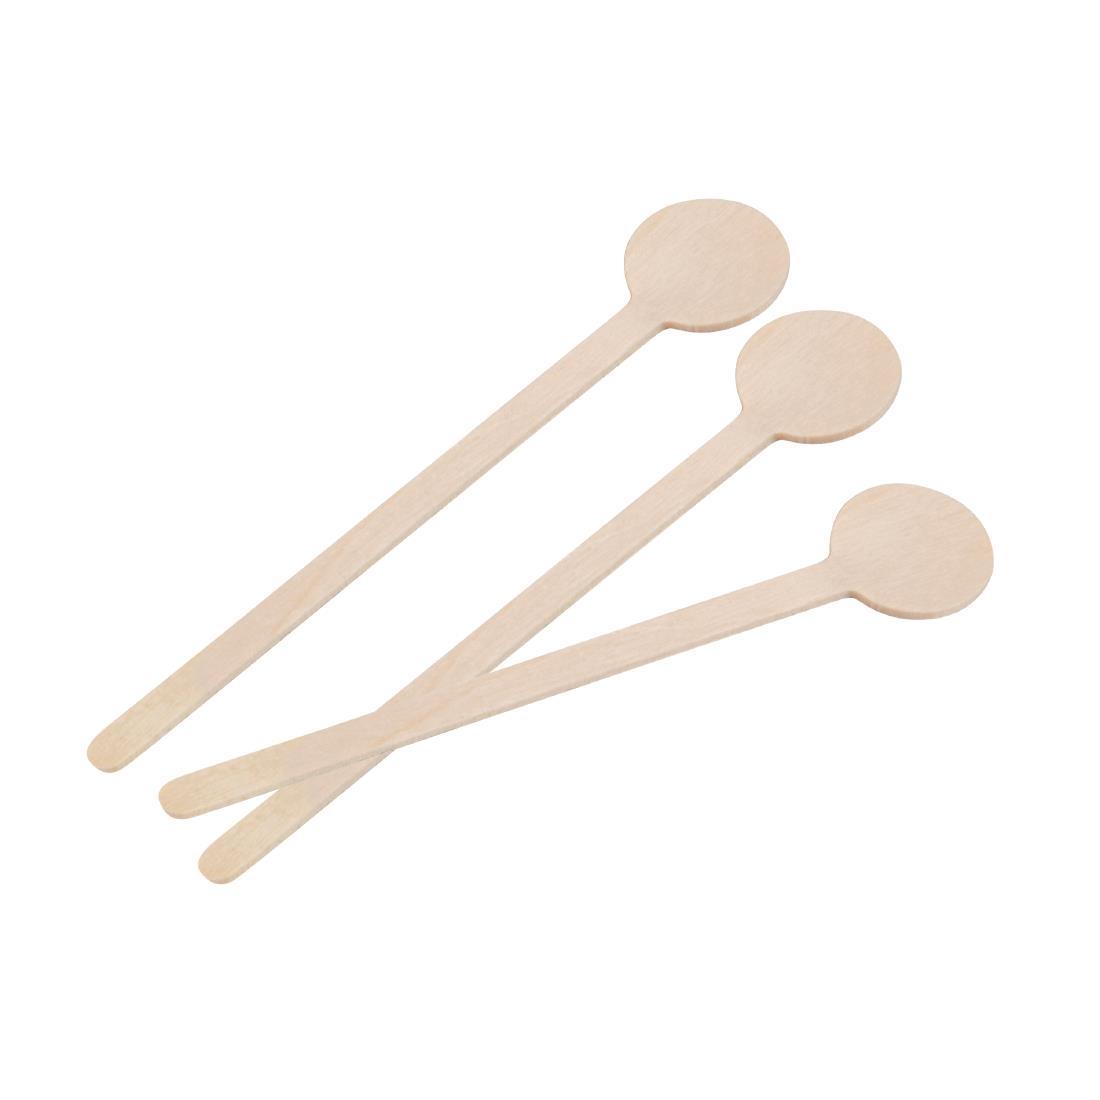 Fiesta Compostable Wooden Cocktail Stirrers 100mm (Pack of 100) - DB492  - 2